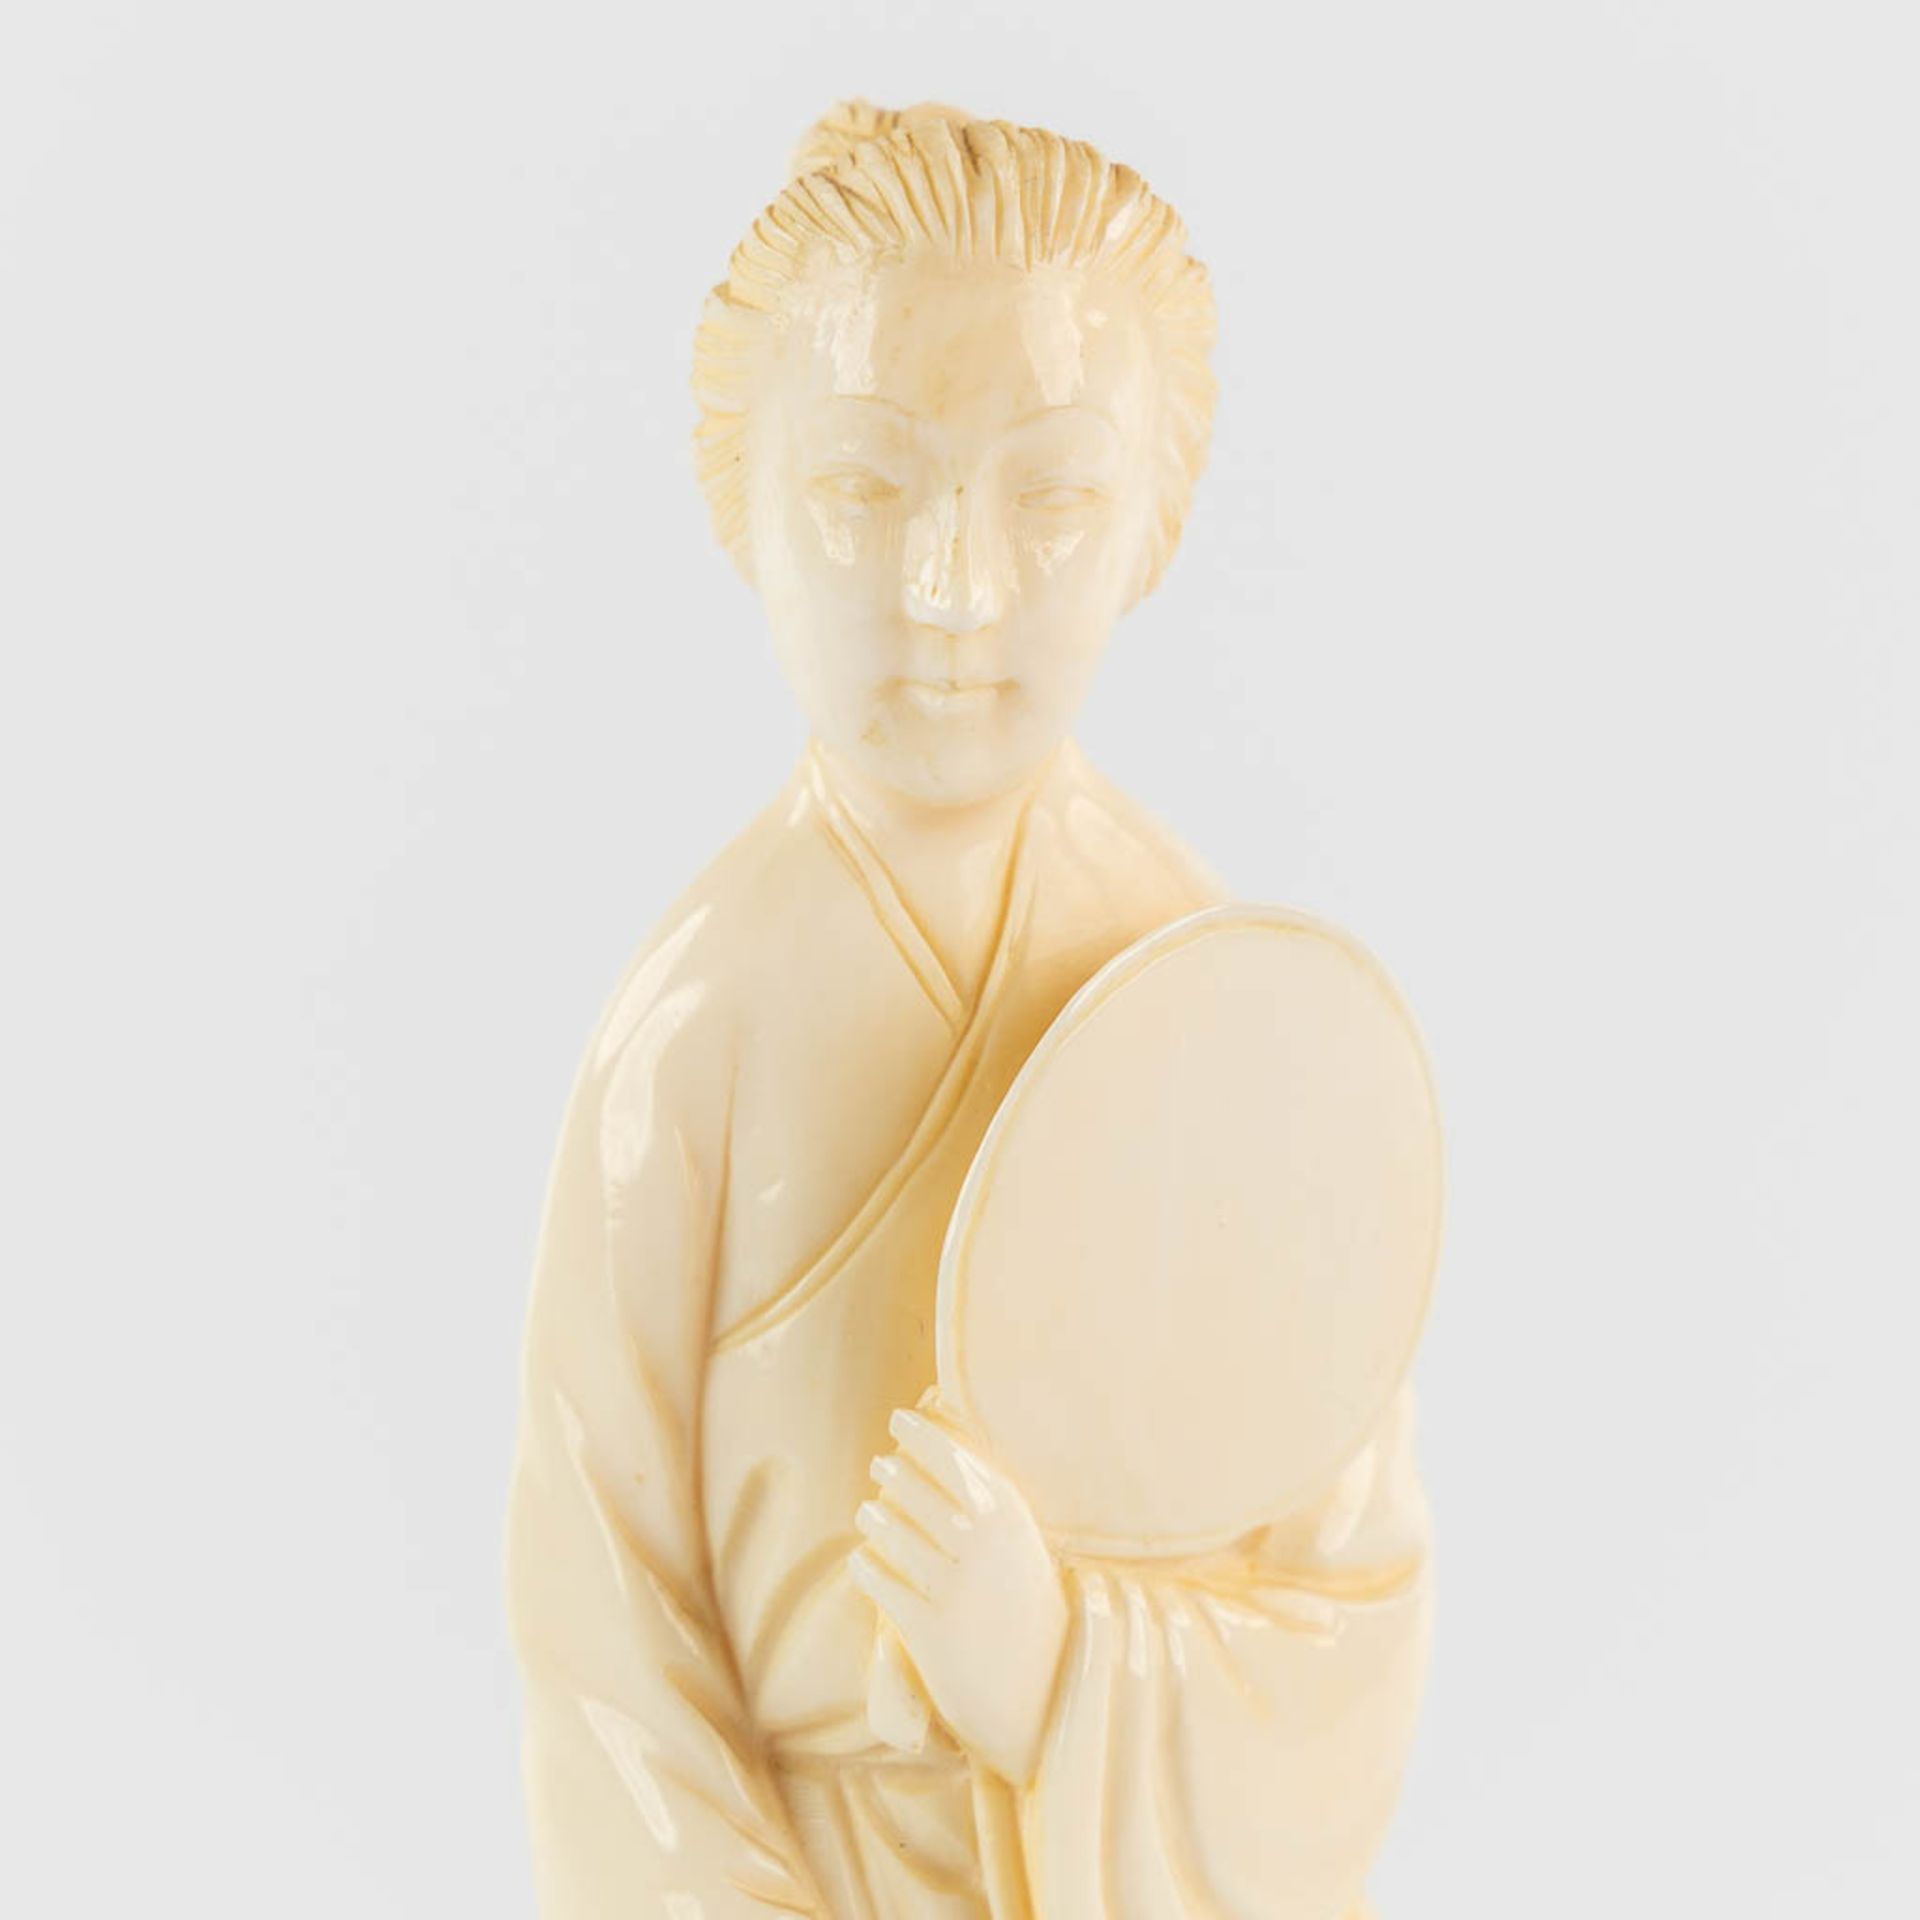 Figurine of a Beauty with mirror, sculptured ivory, China. (L:2,5 x W:4 x H:18 cm) - Image 8 of 9